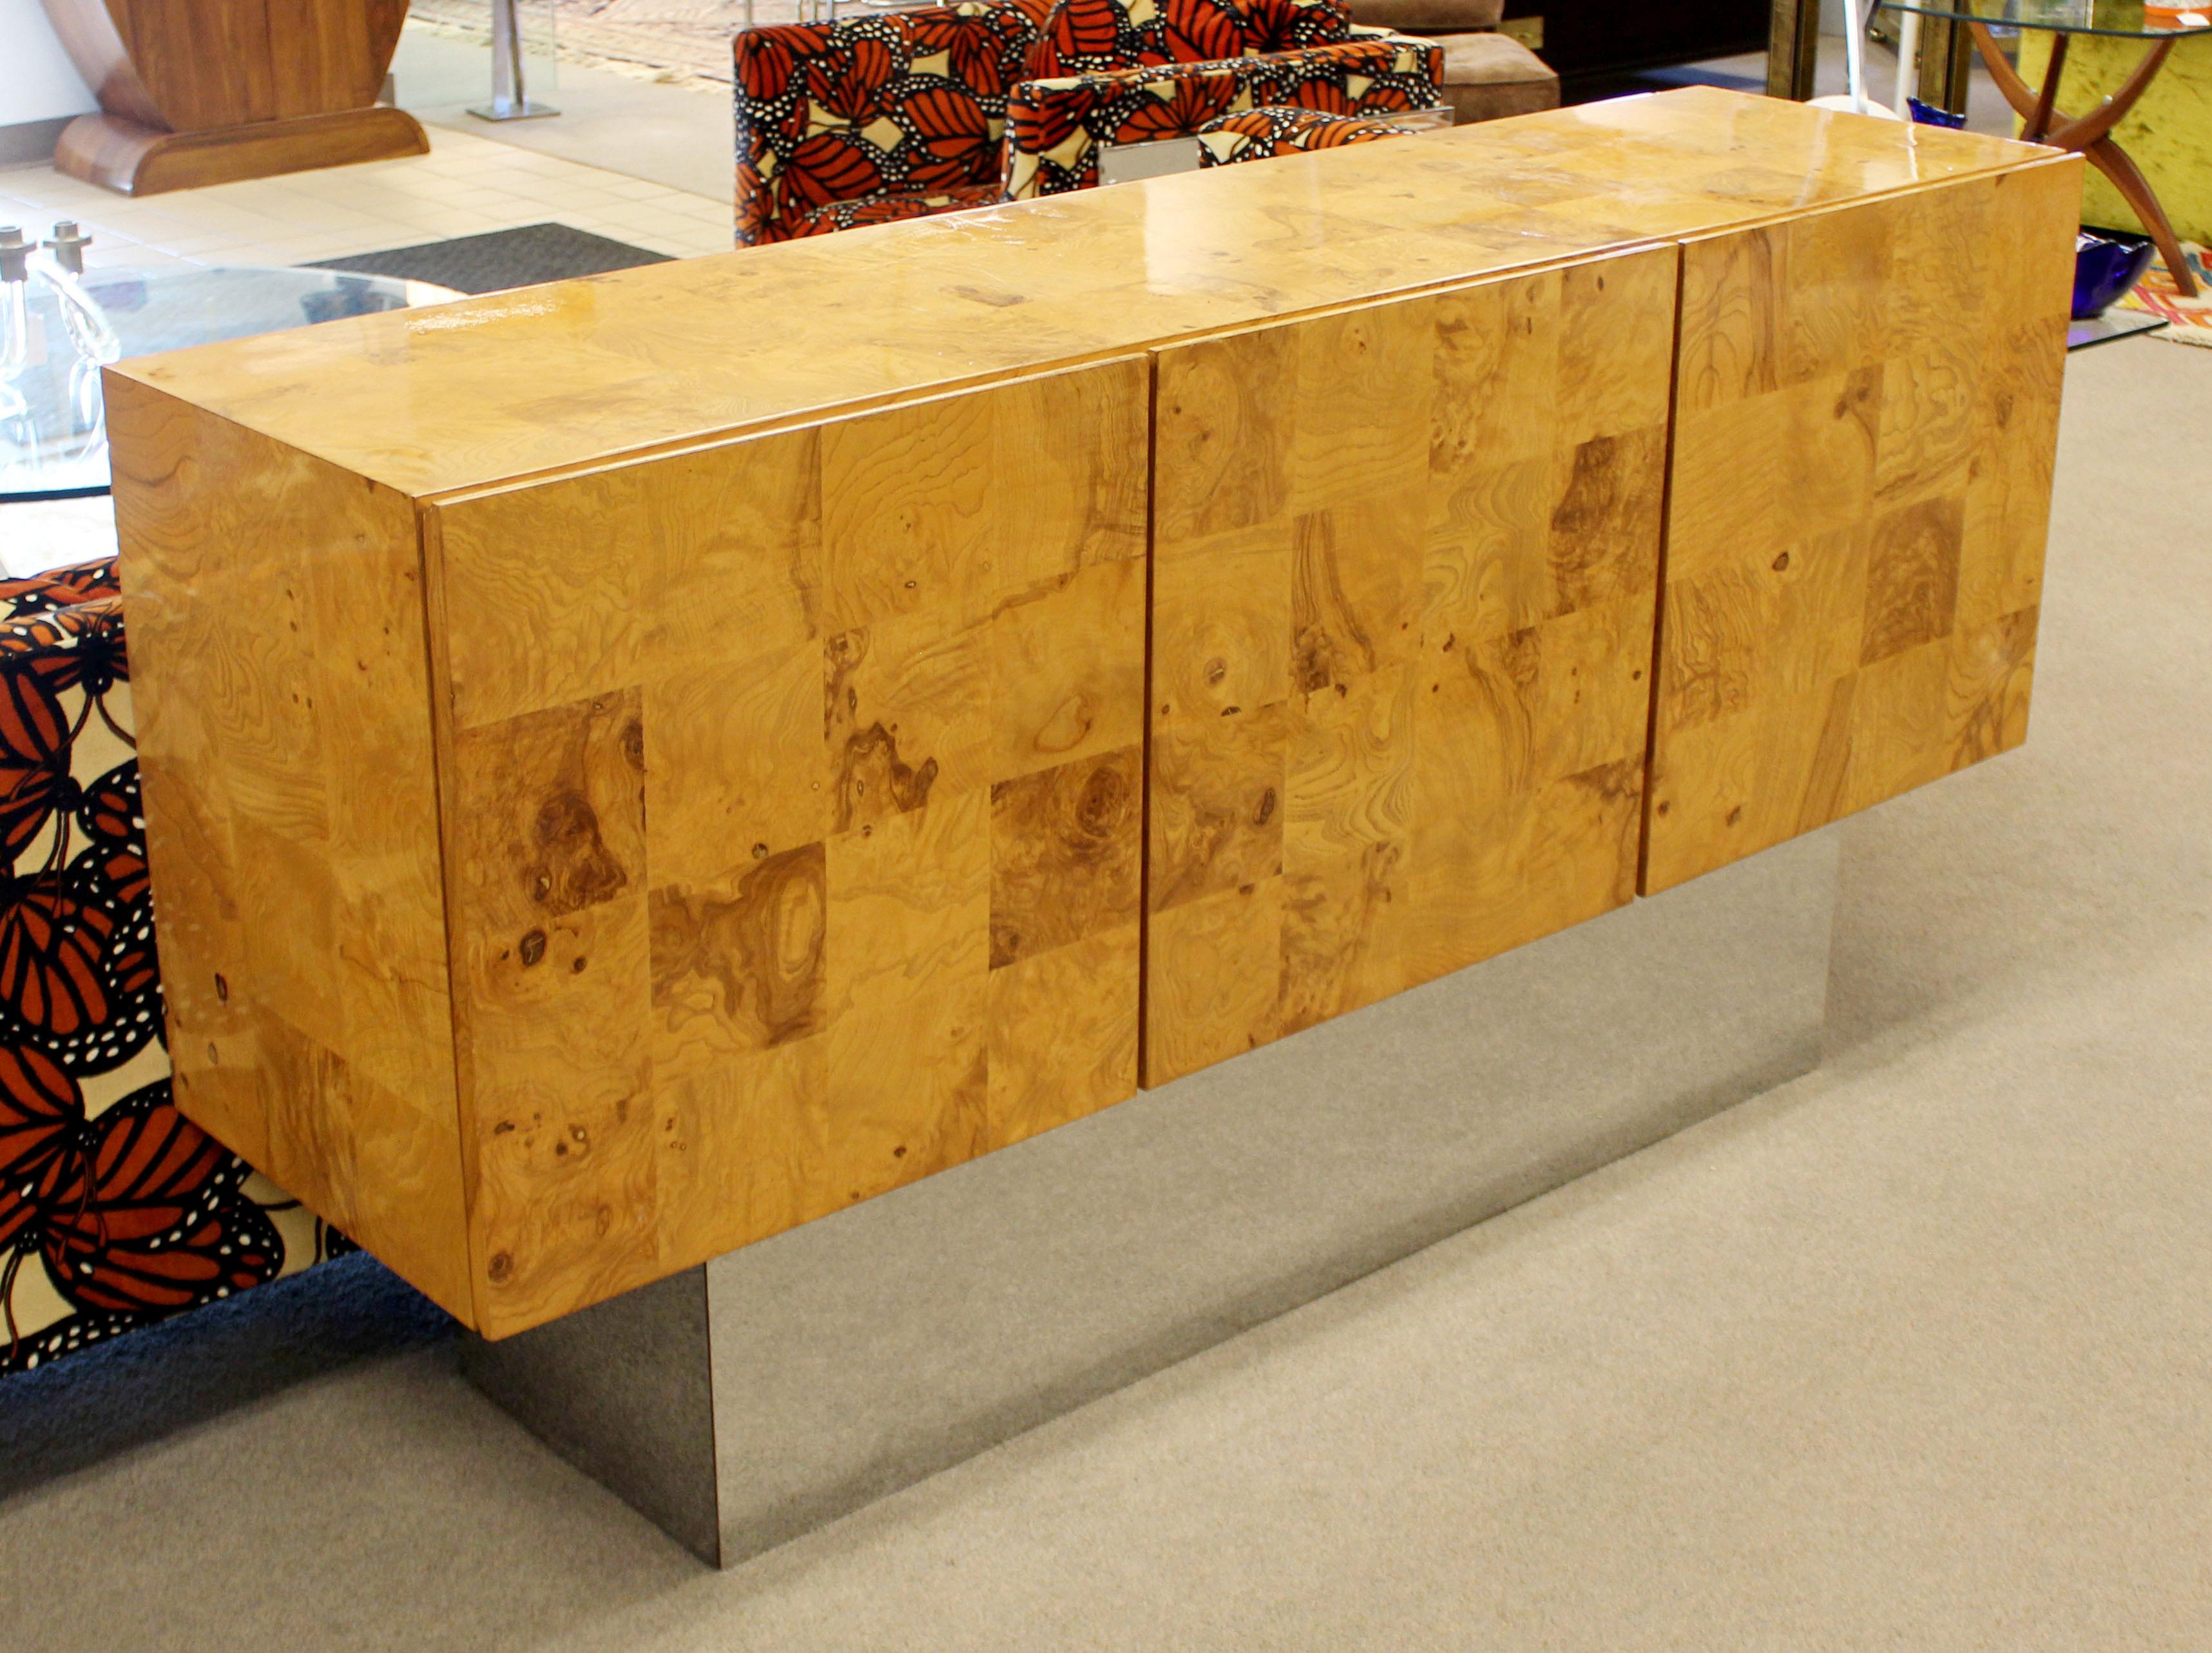 For your consideration is an exceptional, burl wood credenza, floating on a large chrome plinth base, by Milo Baughman for Thayer Coggin, circa 1970s. In excellent condition. The dimensions are 66